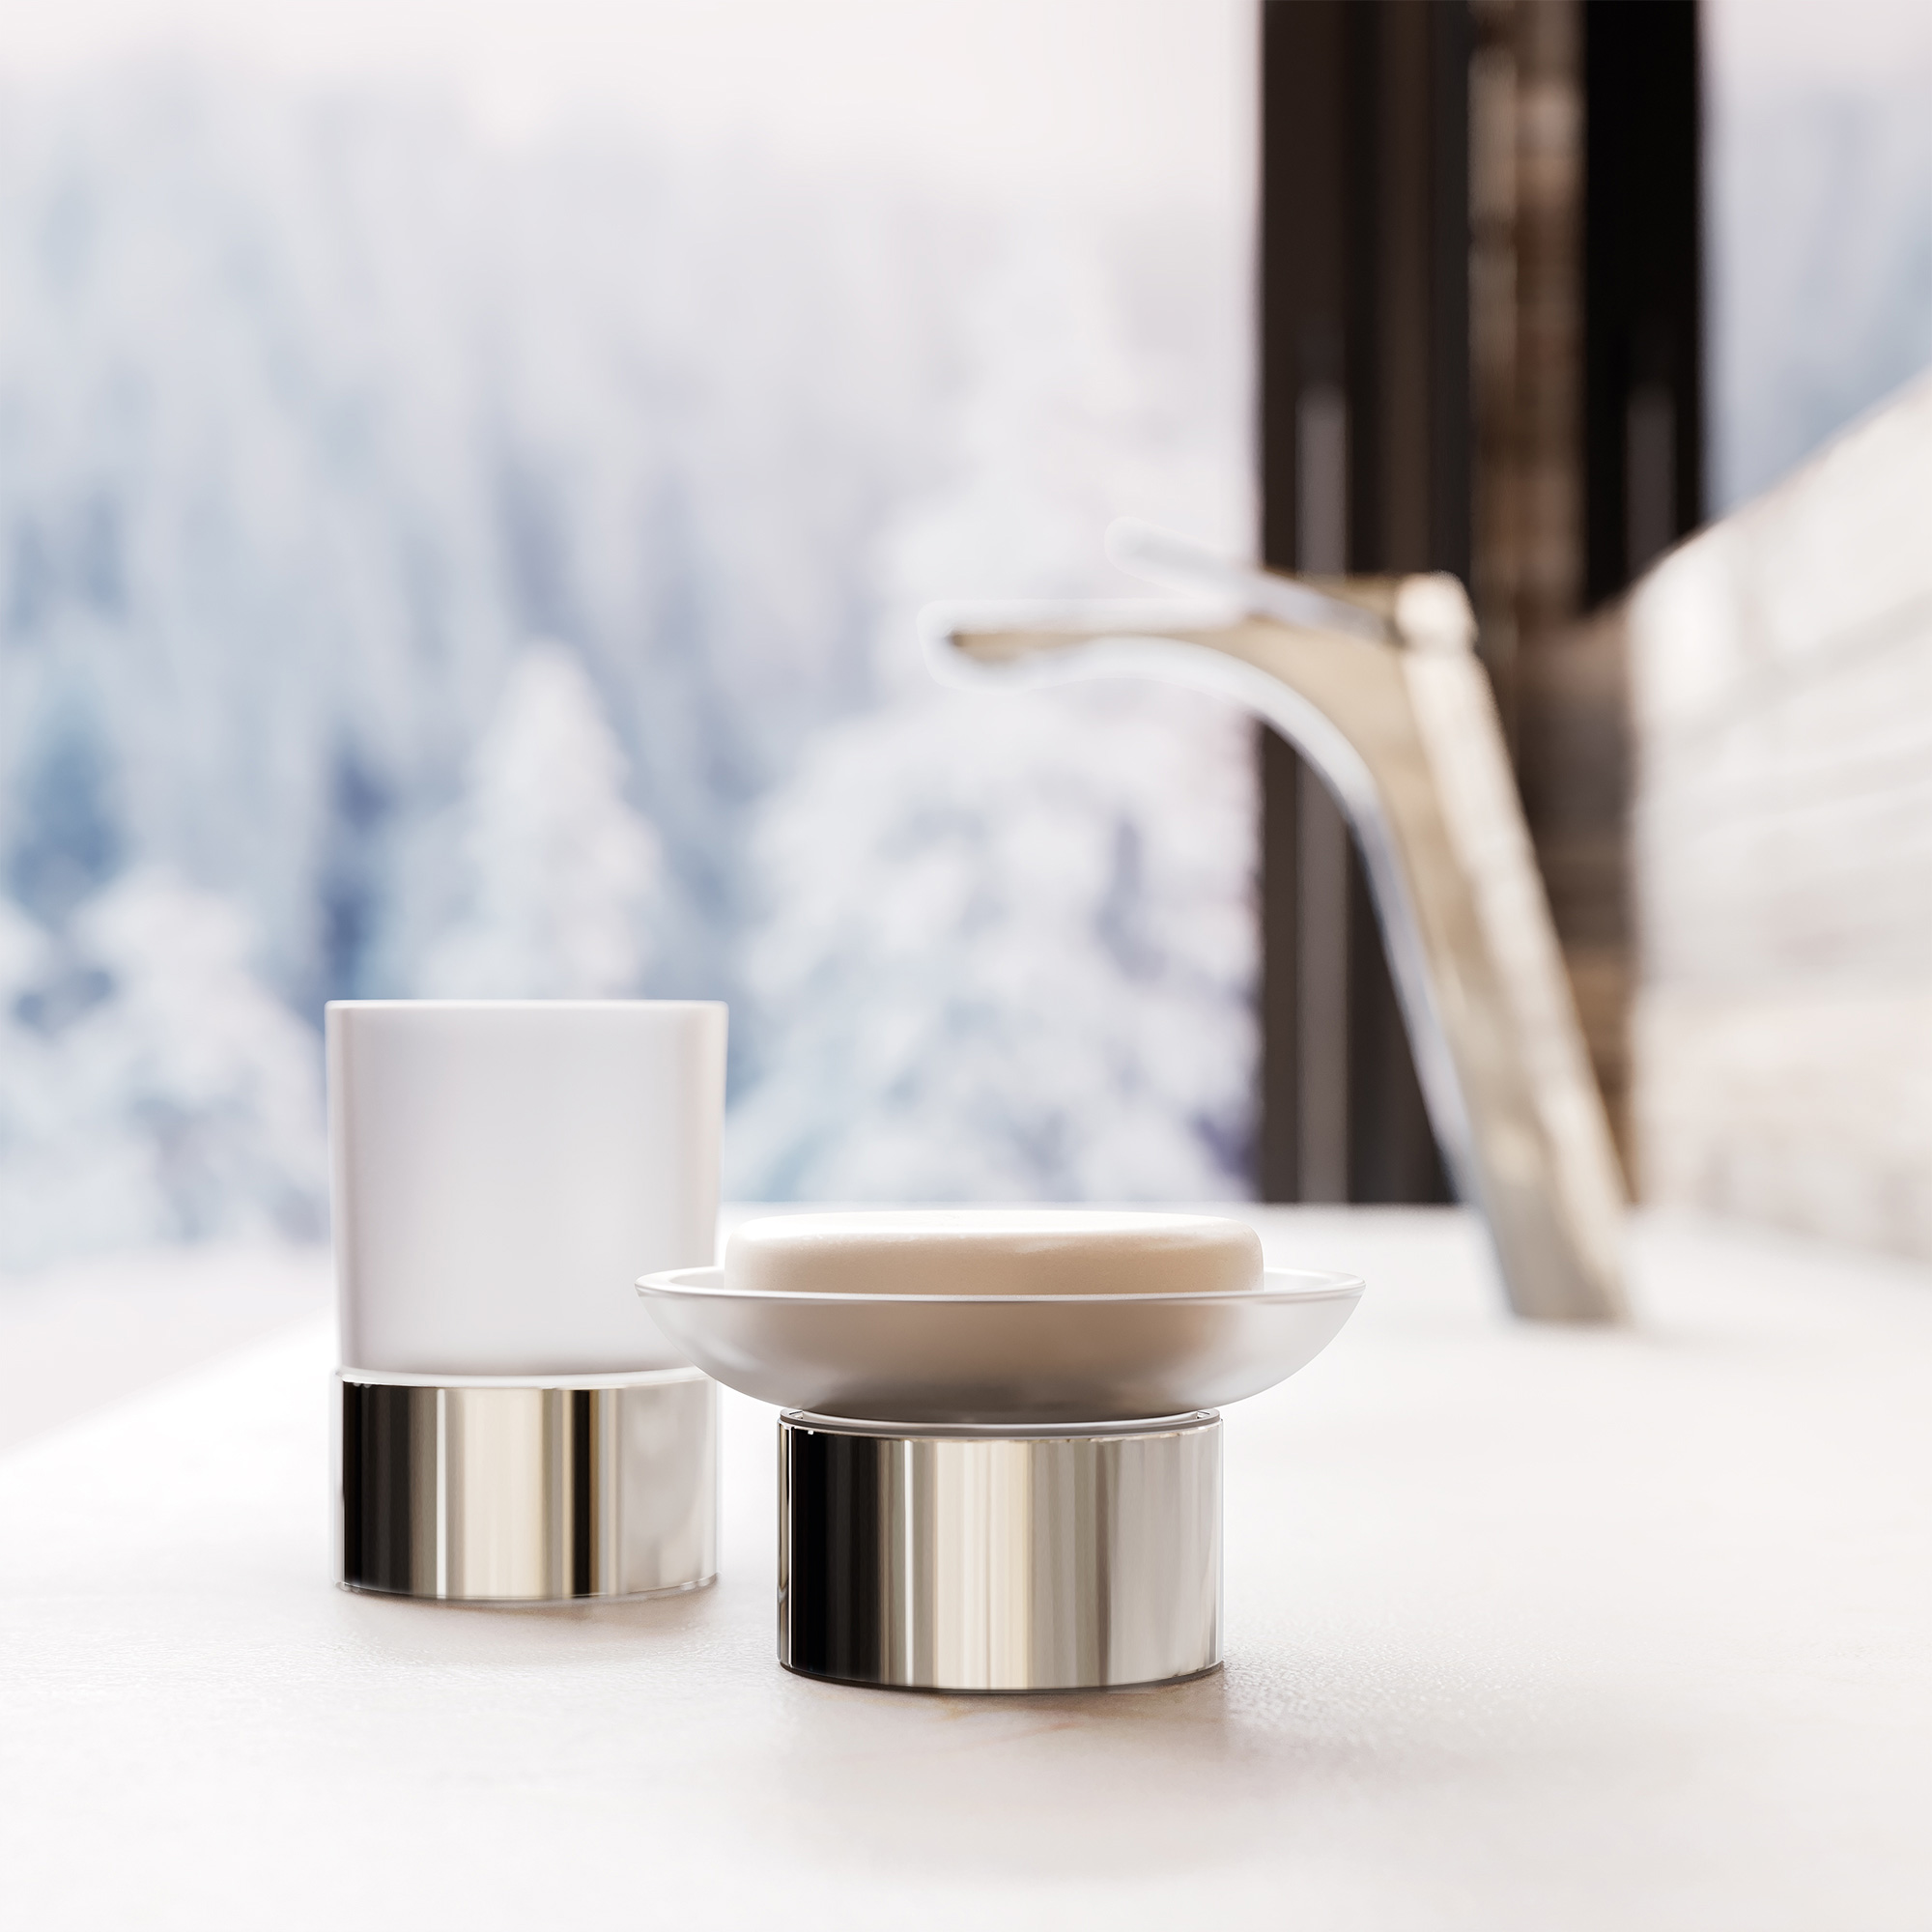 Alpine Chic 2021 – Jörger's new collection “Eleven” celebrates its stylish  premiere in the Chalet - Jörger Bathroom Fittings and Accessories